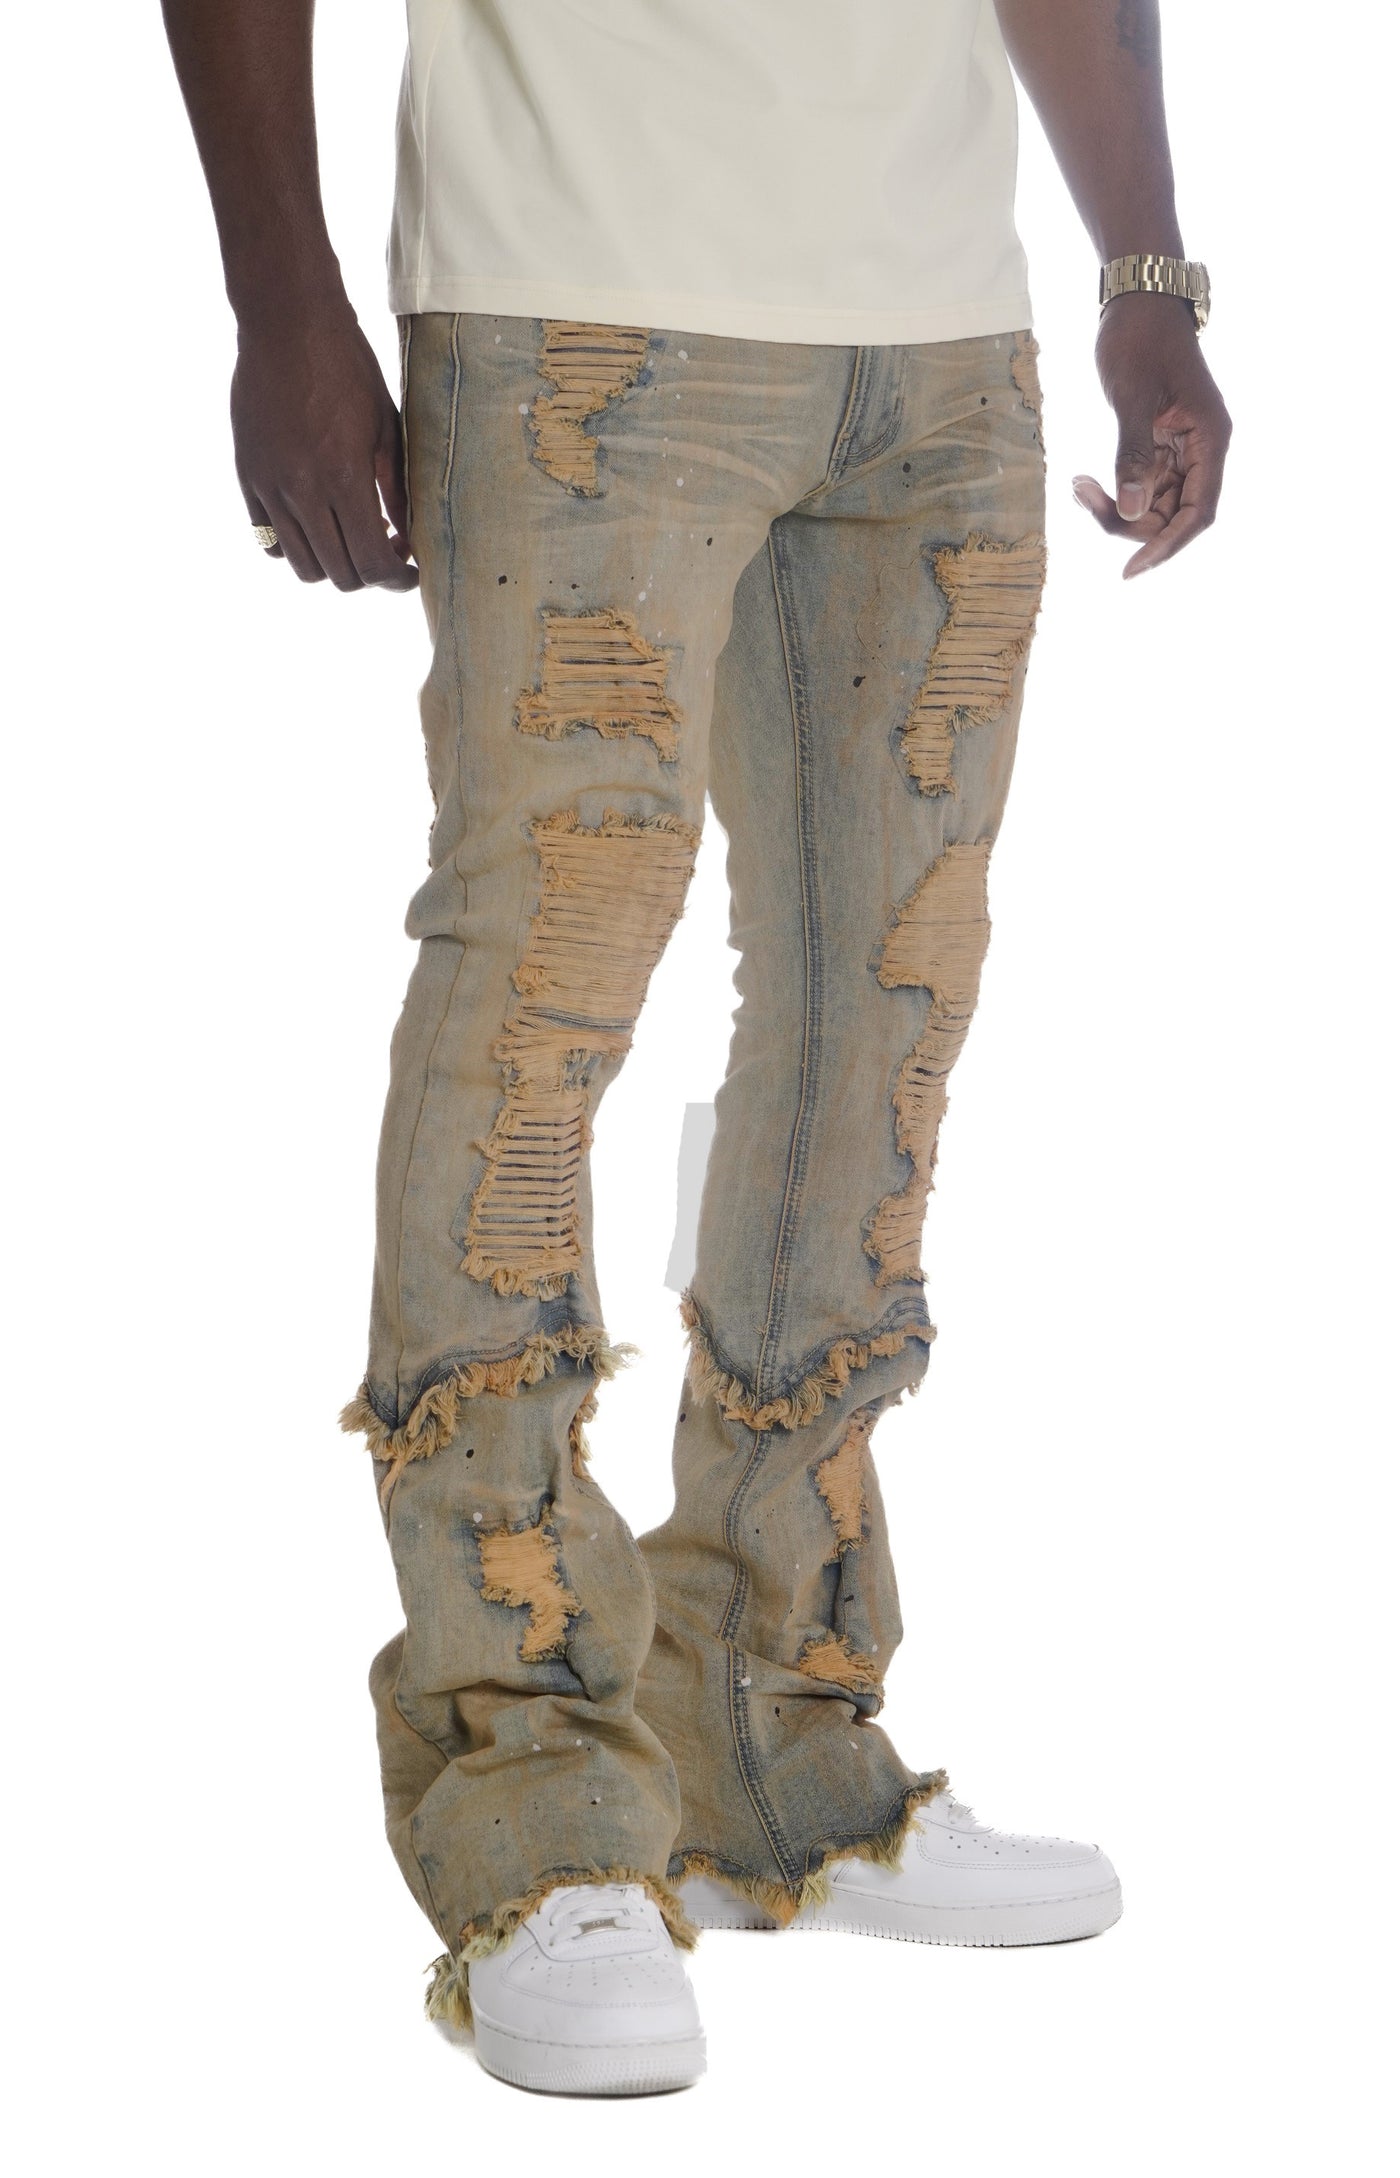 F1788 Rogue 36" Stack Jeans - Dirt